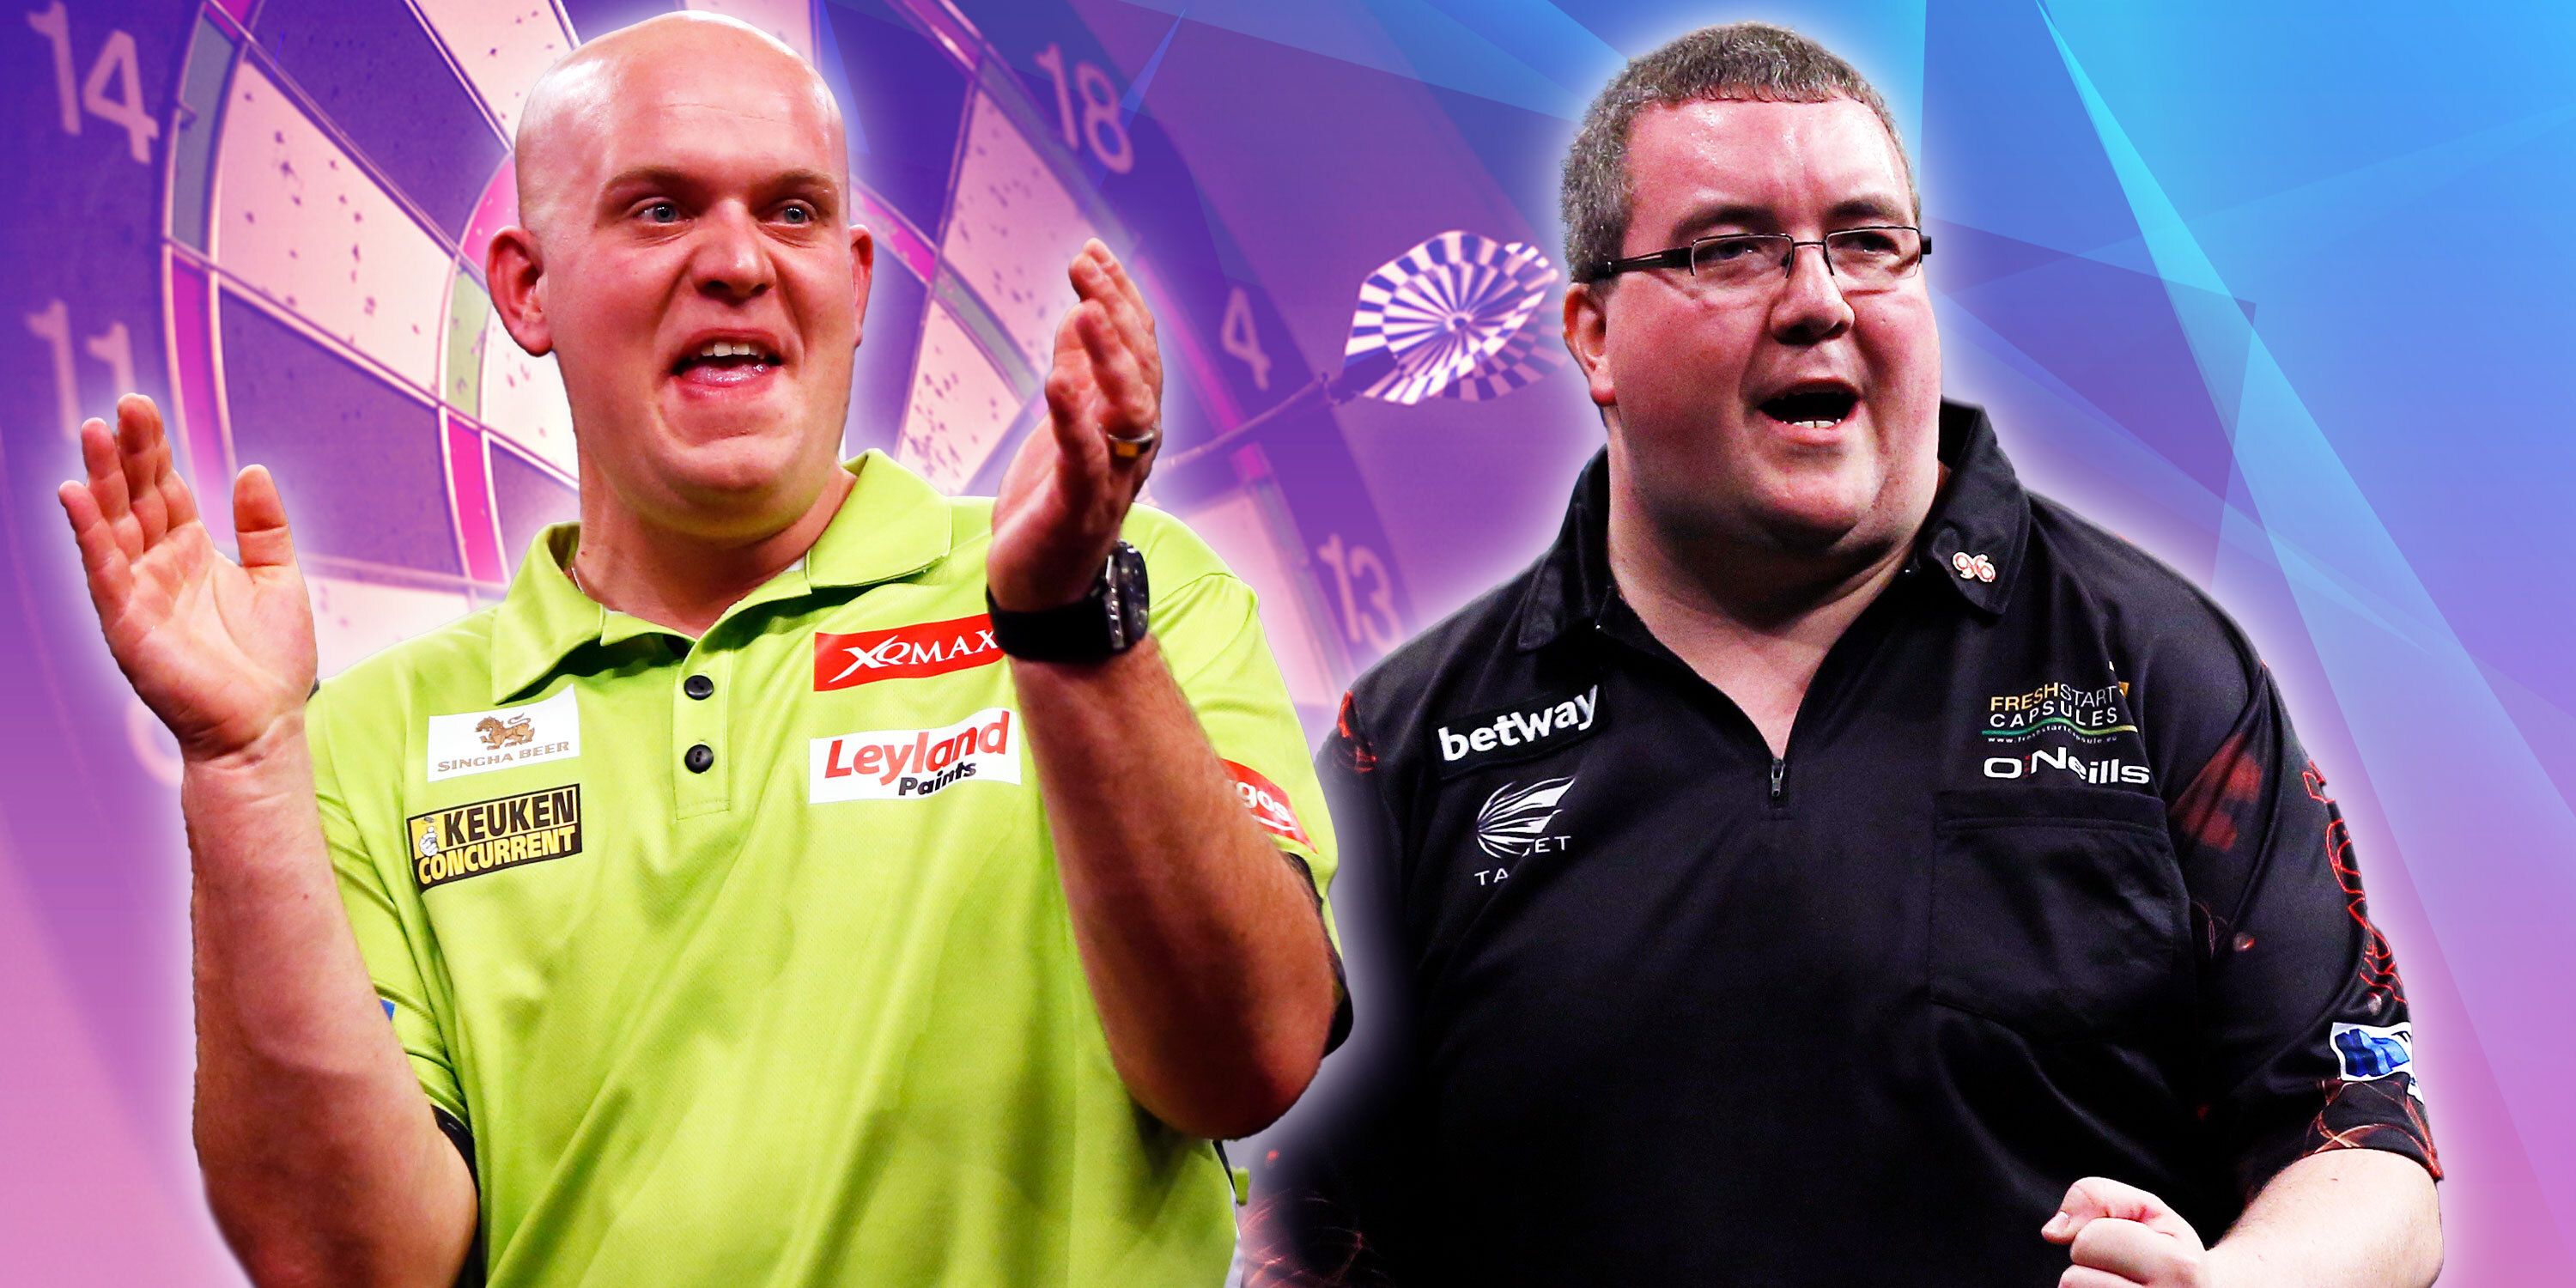 Michael-van-Gerwen-showed-his-class-after-losing-to-Stephen-Bunting-in-Cazoo-Masters-final